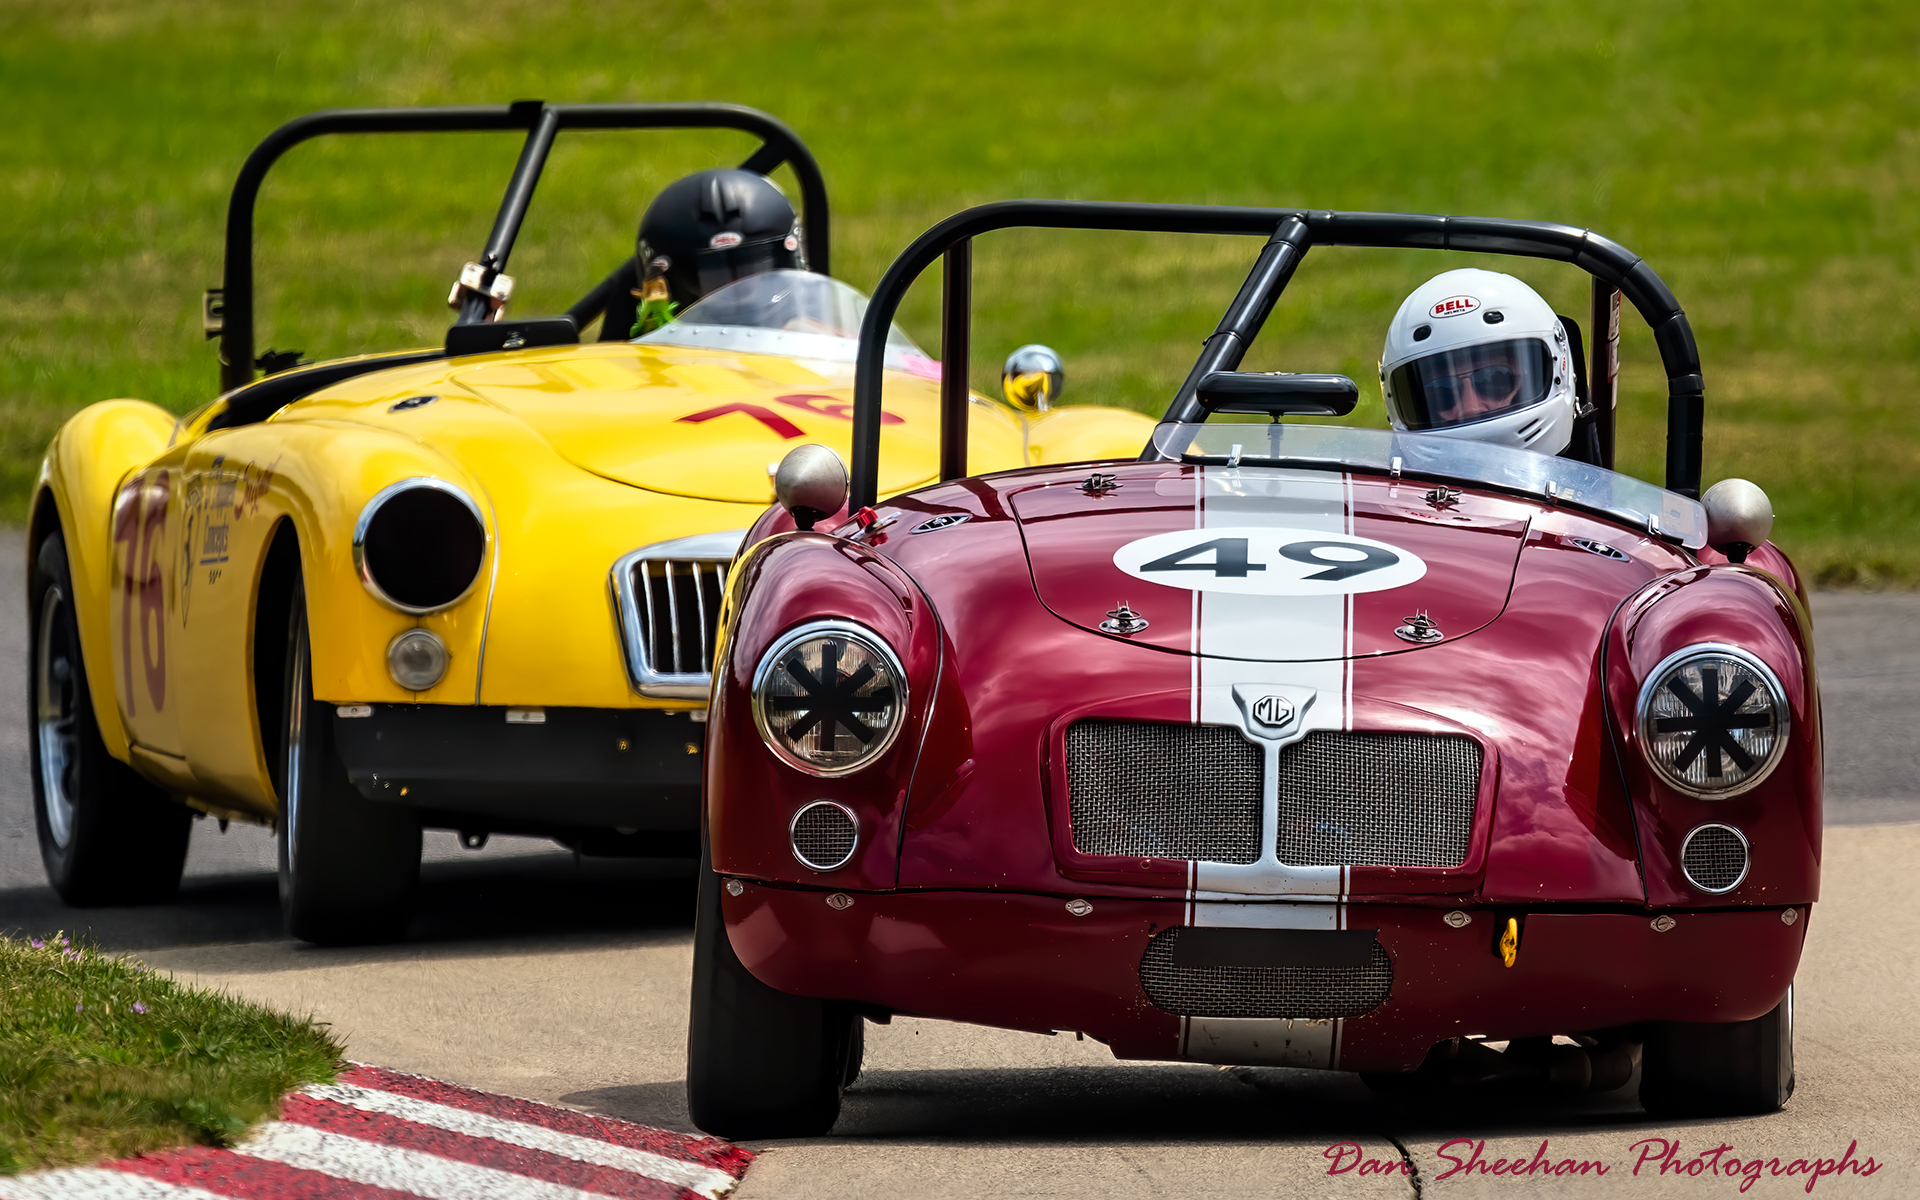 Dueling MG's at Waterford Hills in Michigan : Cars : Dan Sheehan Photographs - Fine Art Stock Photography